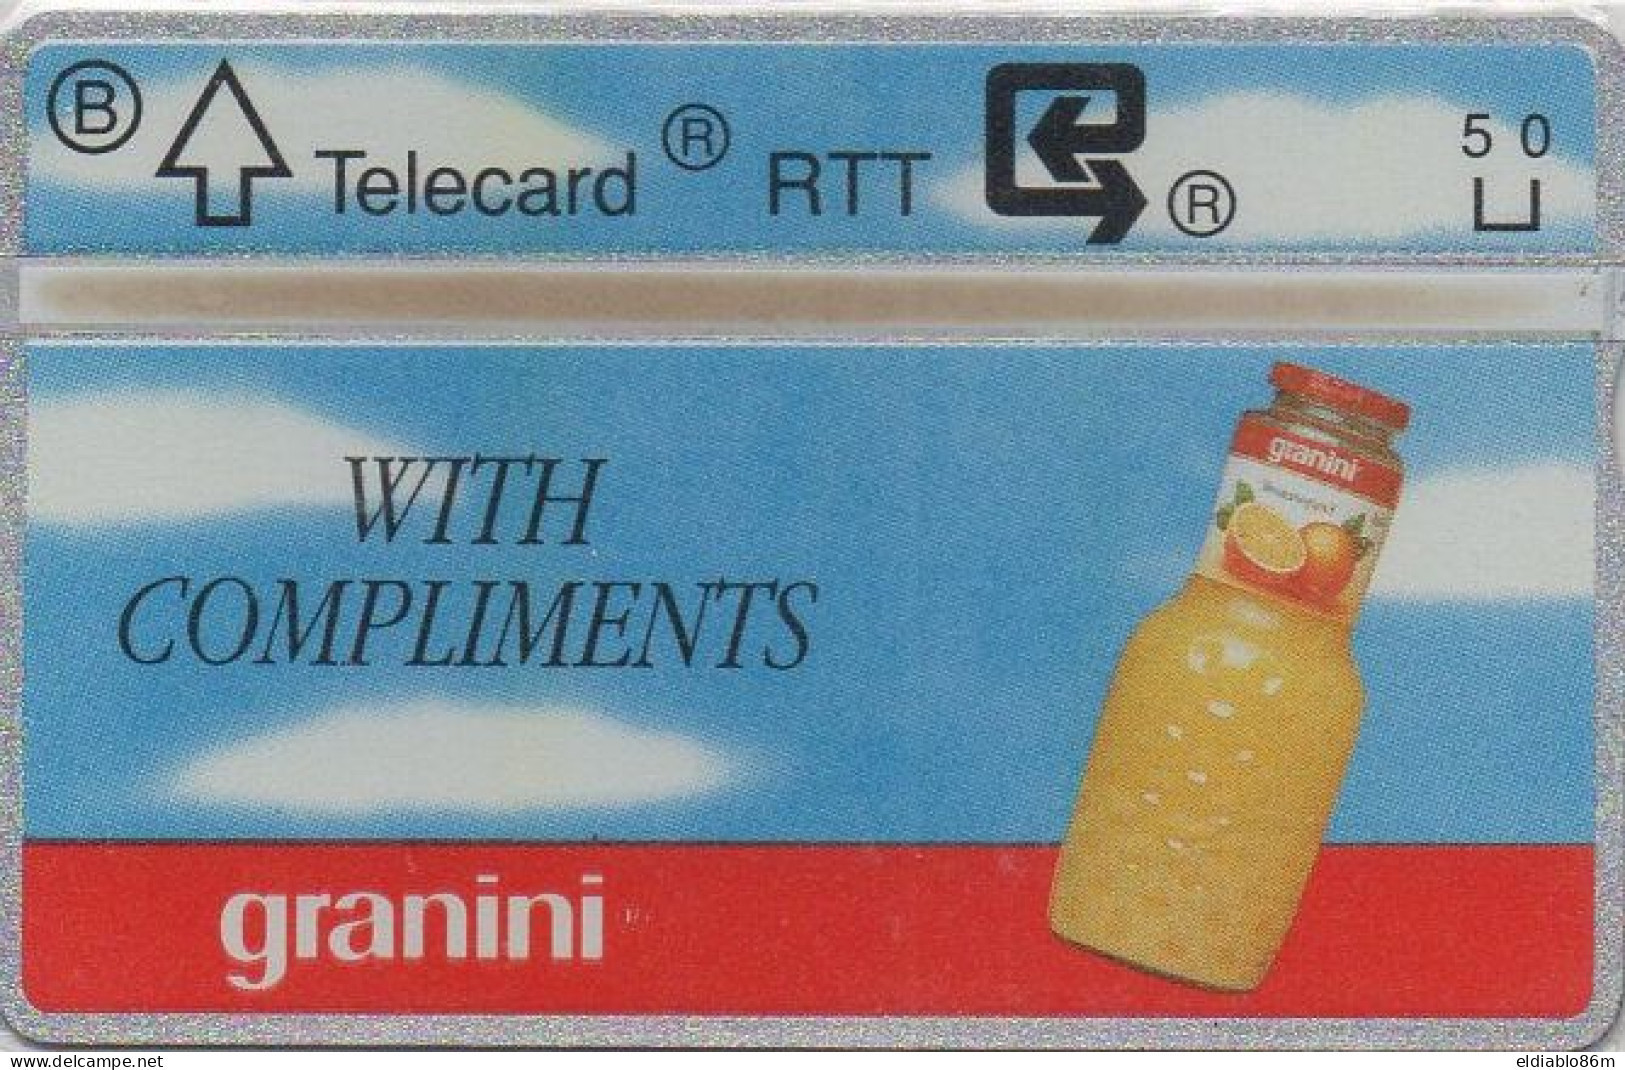 BELGIUM - L&G - P261 - GRANINI - WITH COMPLIMENTS - MINT - Sin Chip